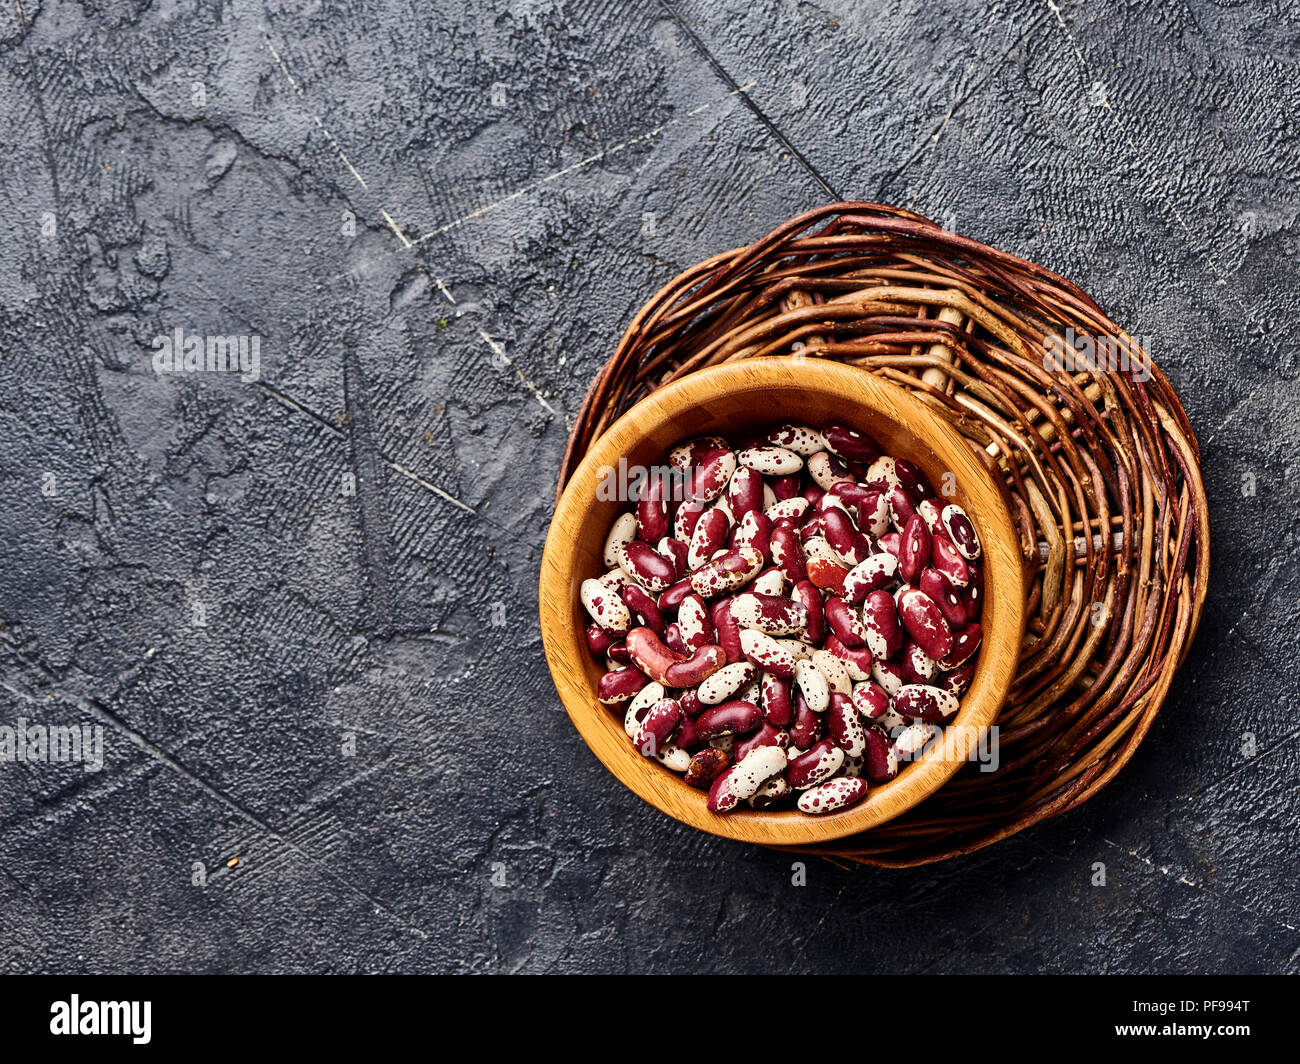 Red beans with white spots on black background. Top view. Stock Photo